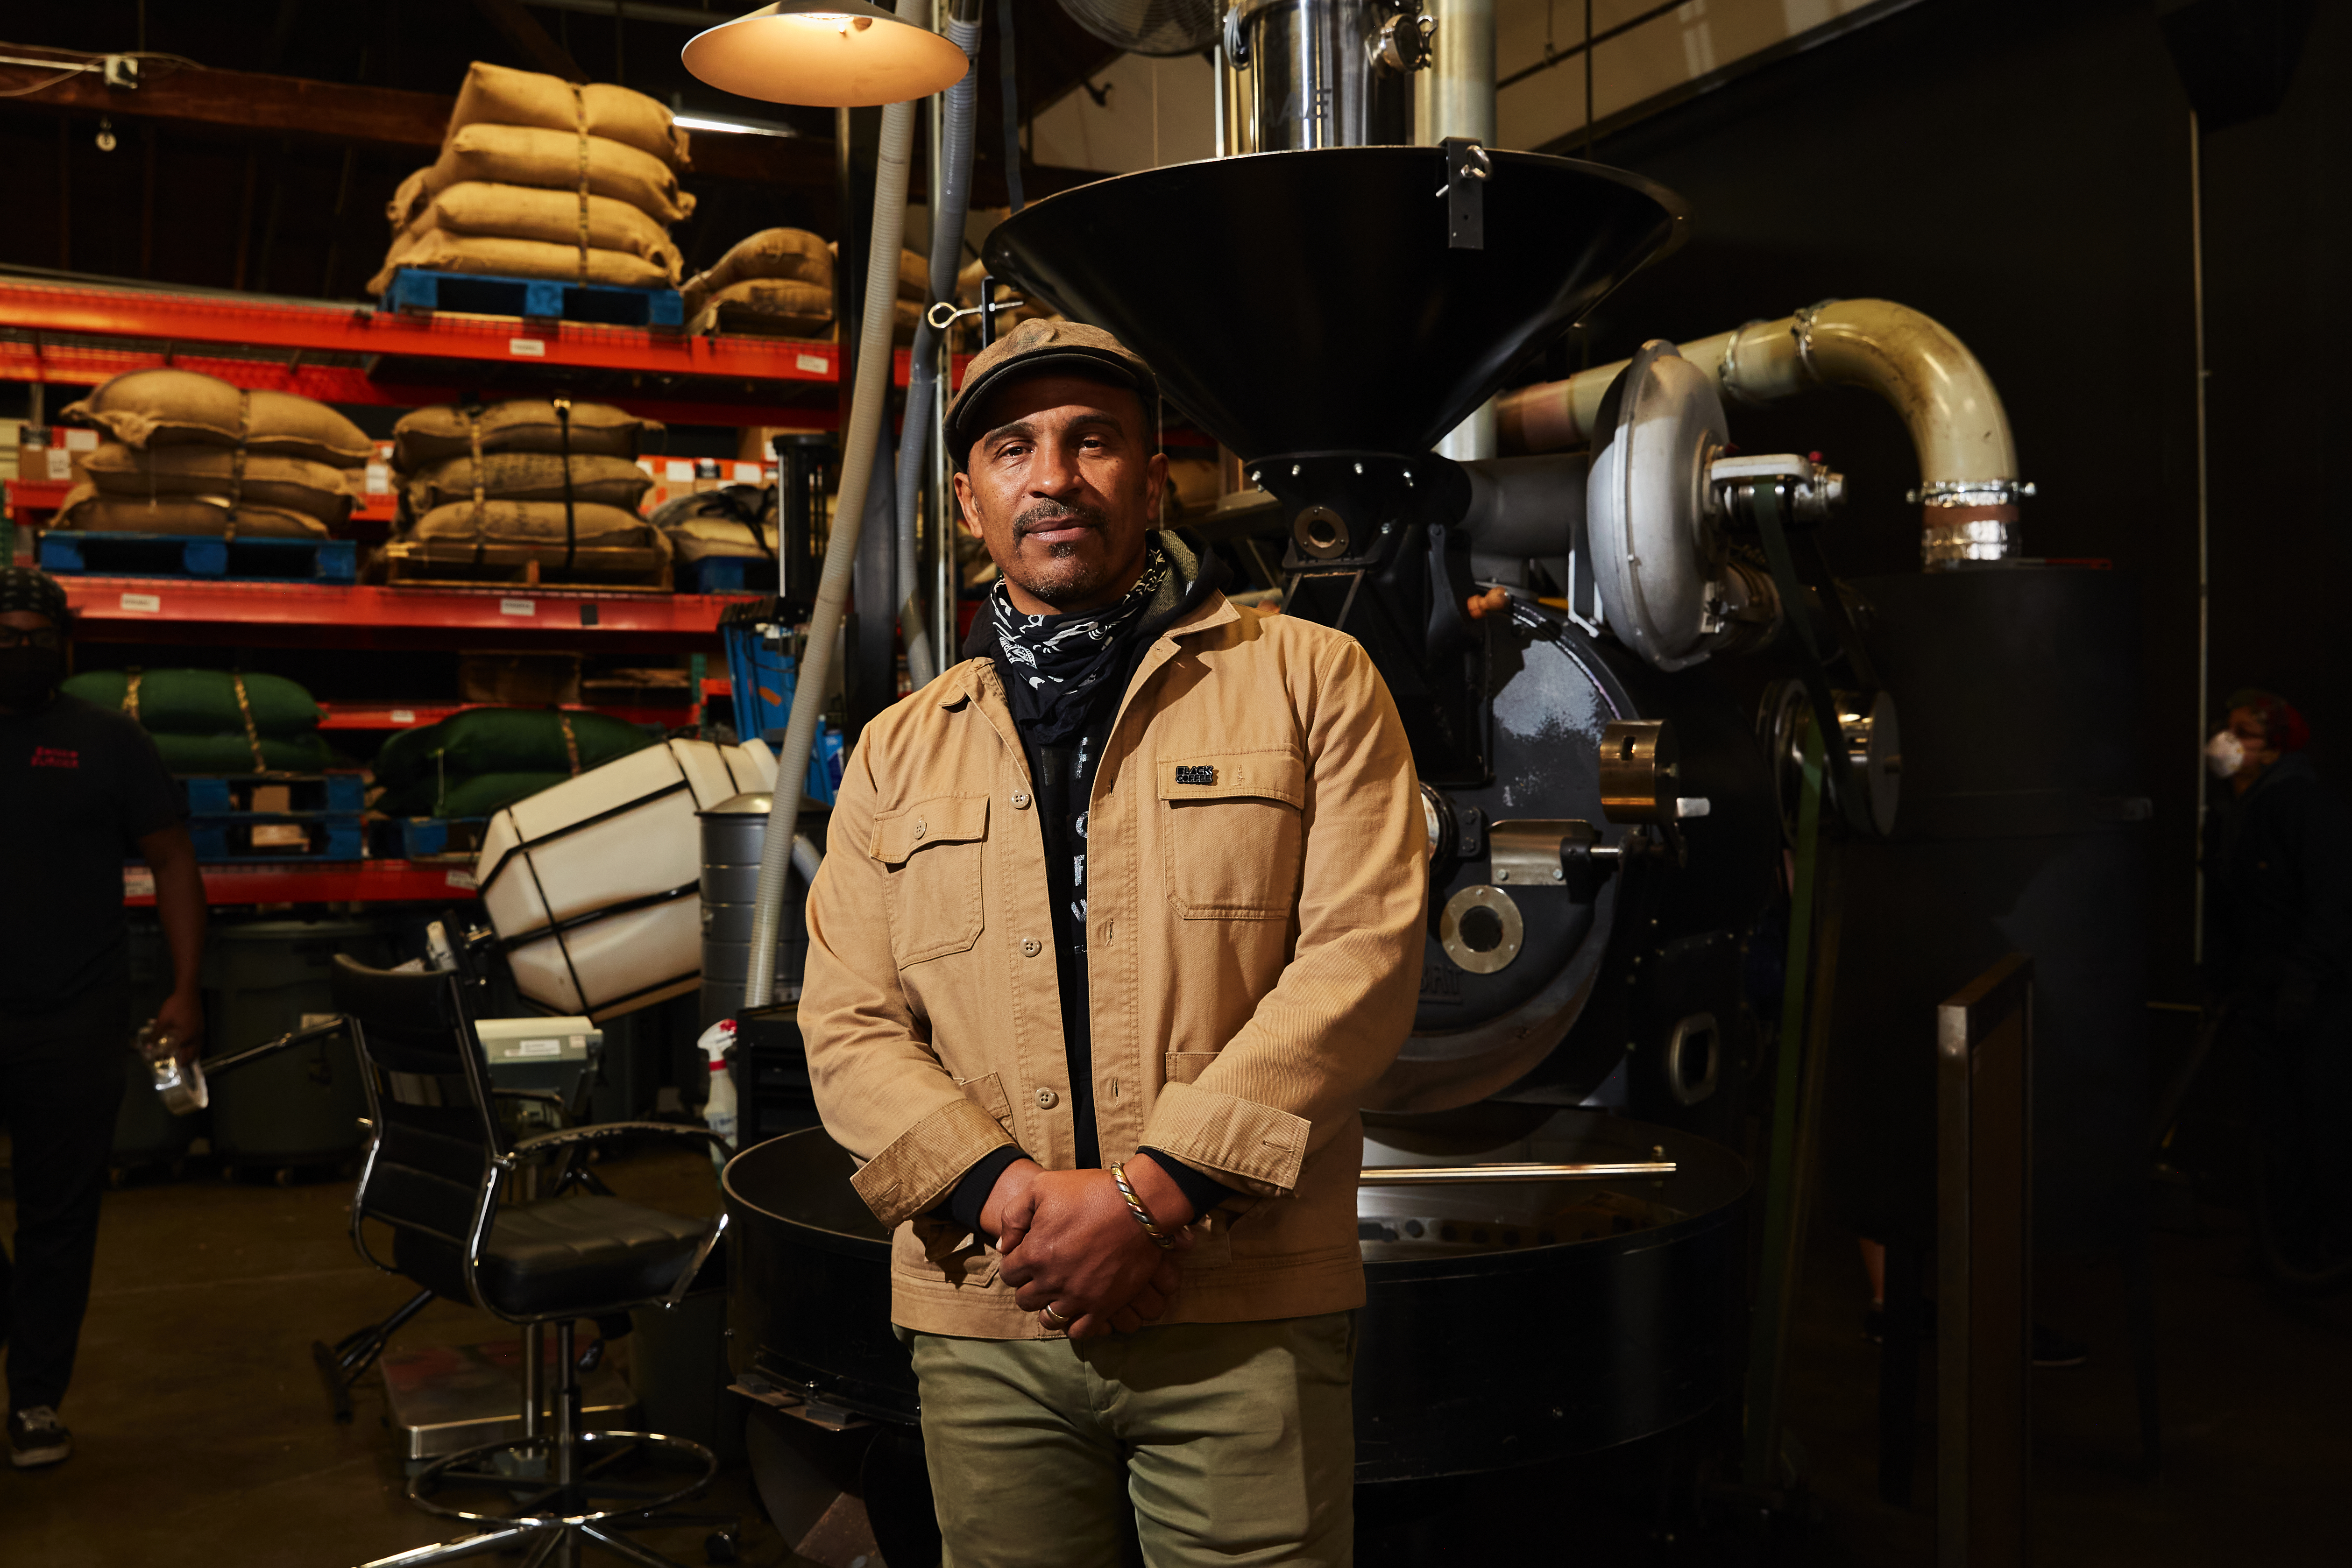 Man wearing cap standing in front of a coffee roaster, with bags of beans stacked on shelves in the background.